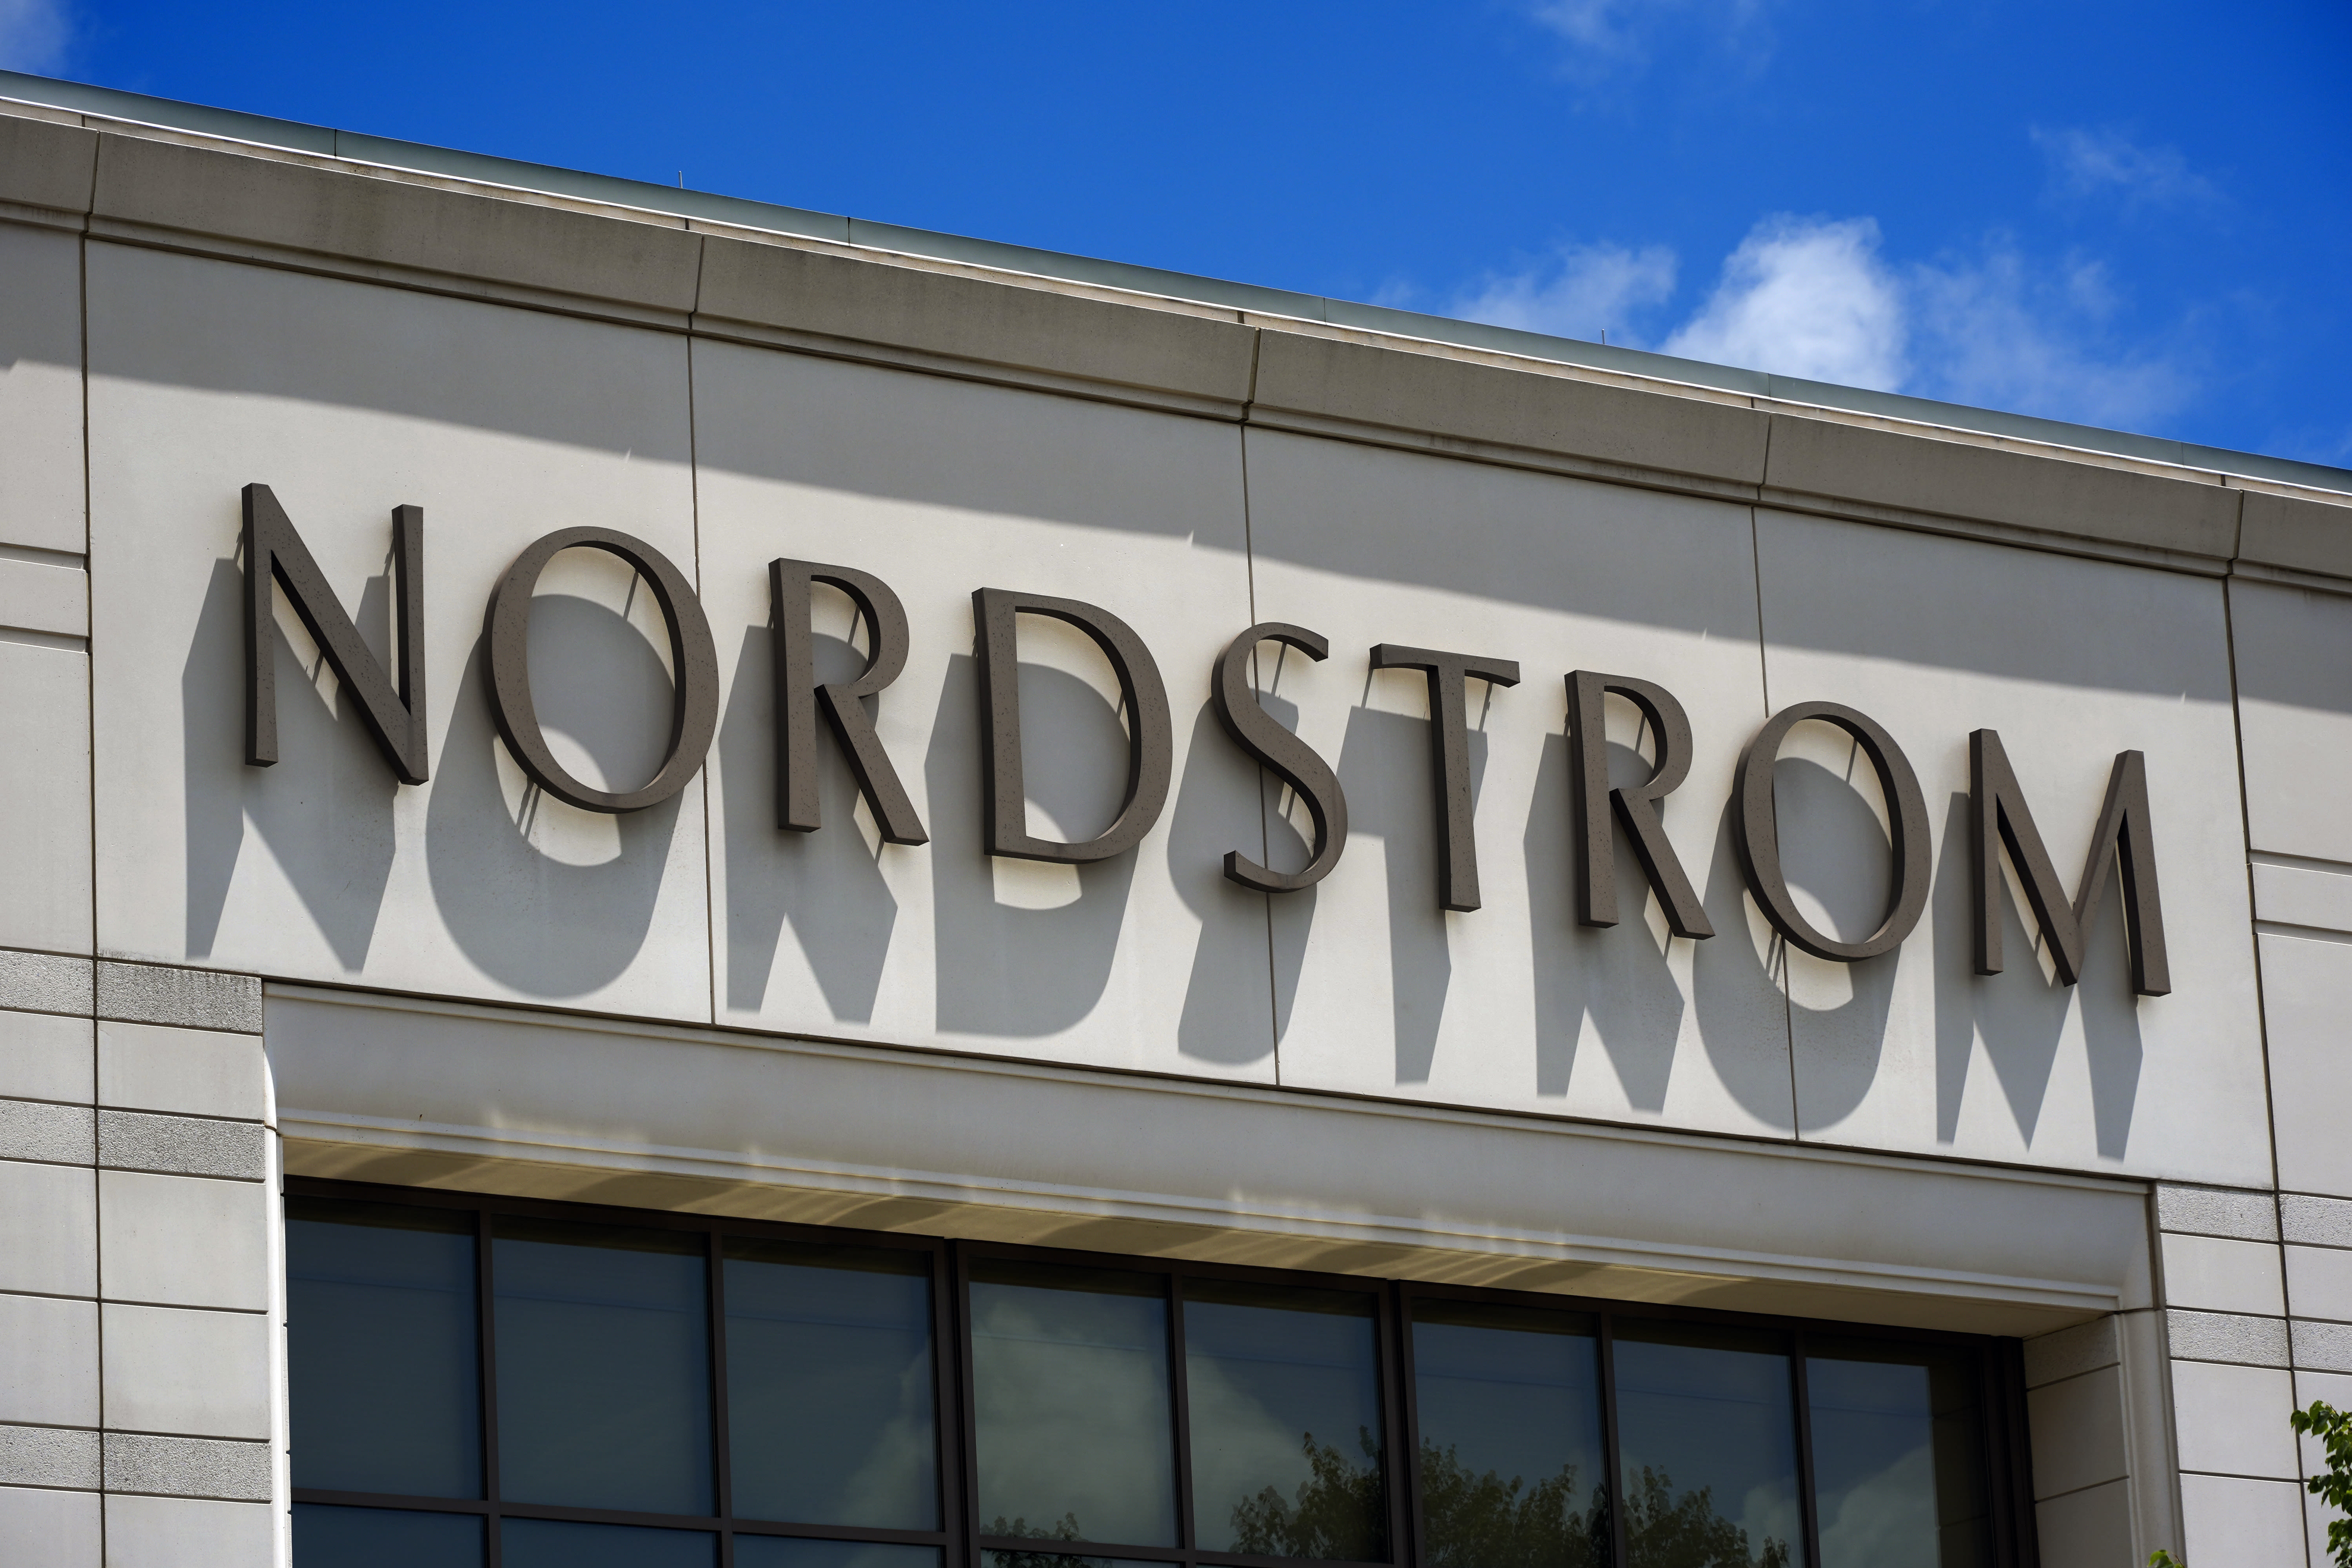 15 of the very best deals from Nordstrom's Anniversary sale — all for under $120